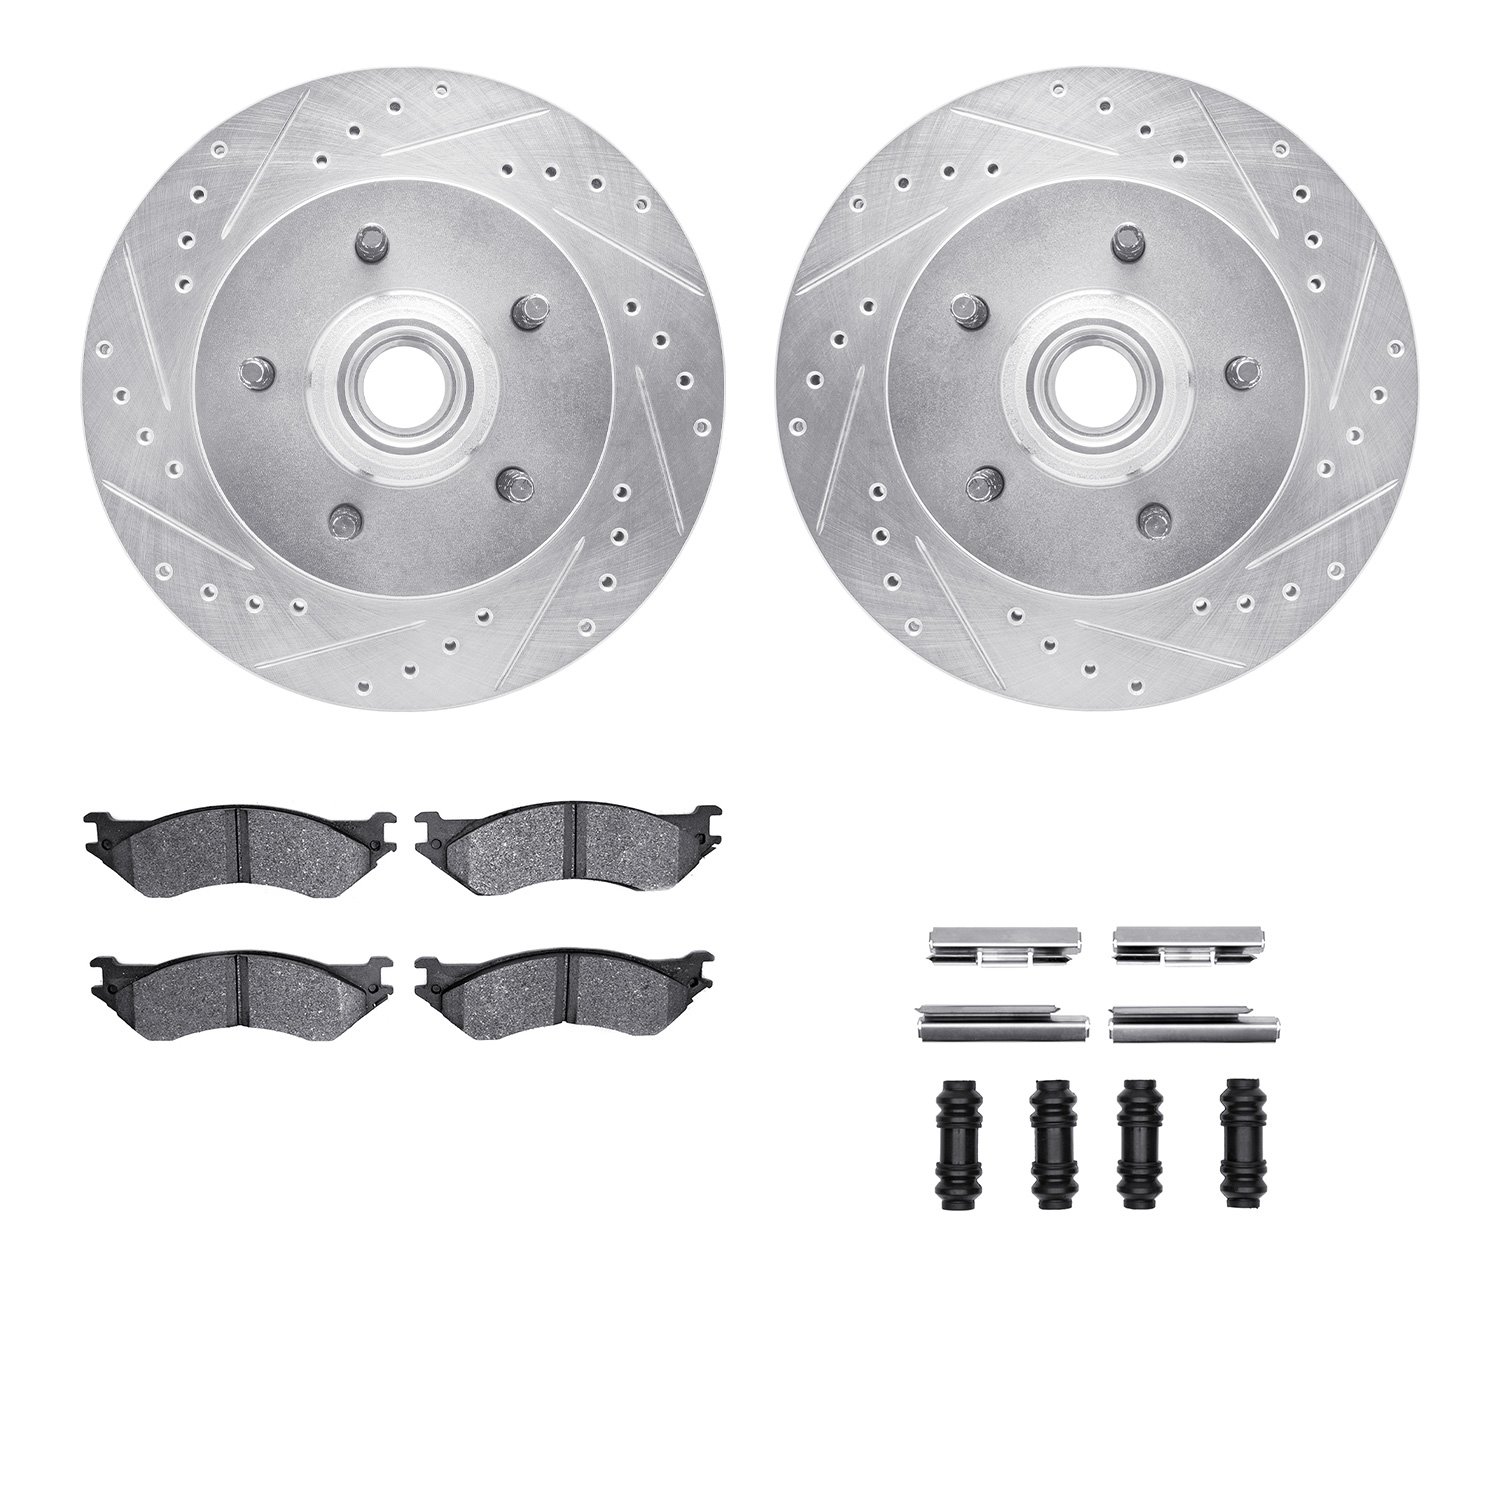 7212-99160 Drilled/Slotted Rotors w/Heavy-Duty Brake Pads Kit & Hardware [Silver], 1999-2004 Ford/Lincoln/Mercury/Mazda, Positio